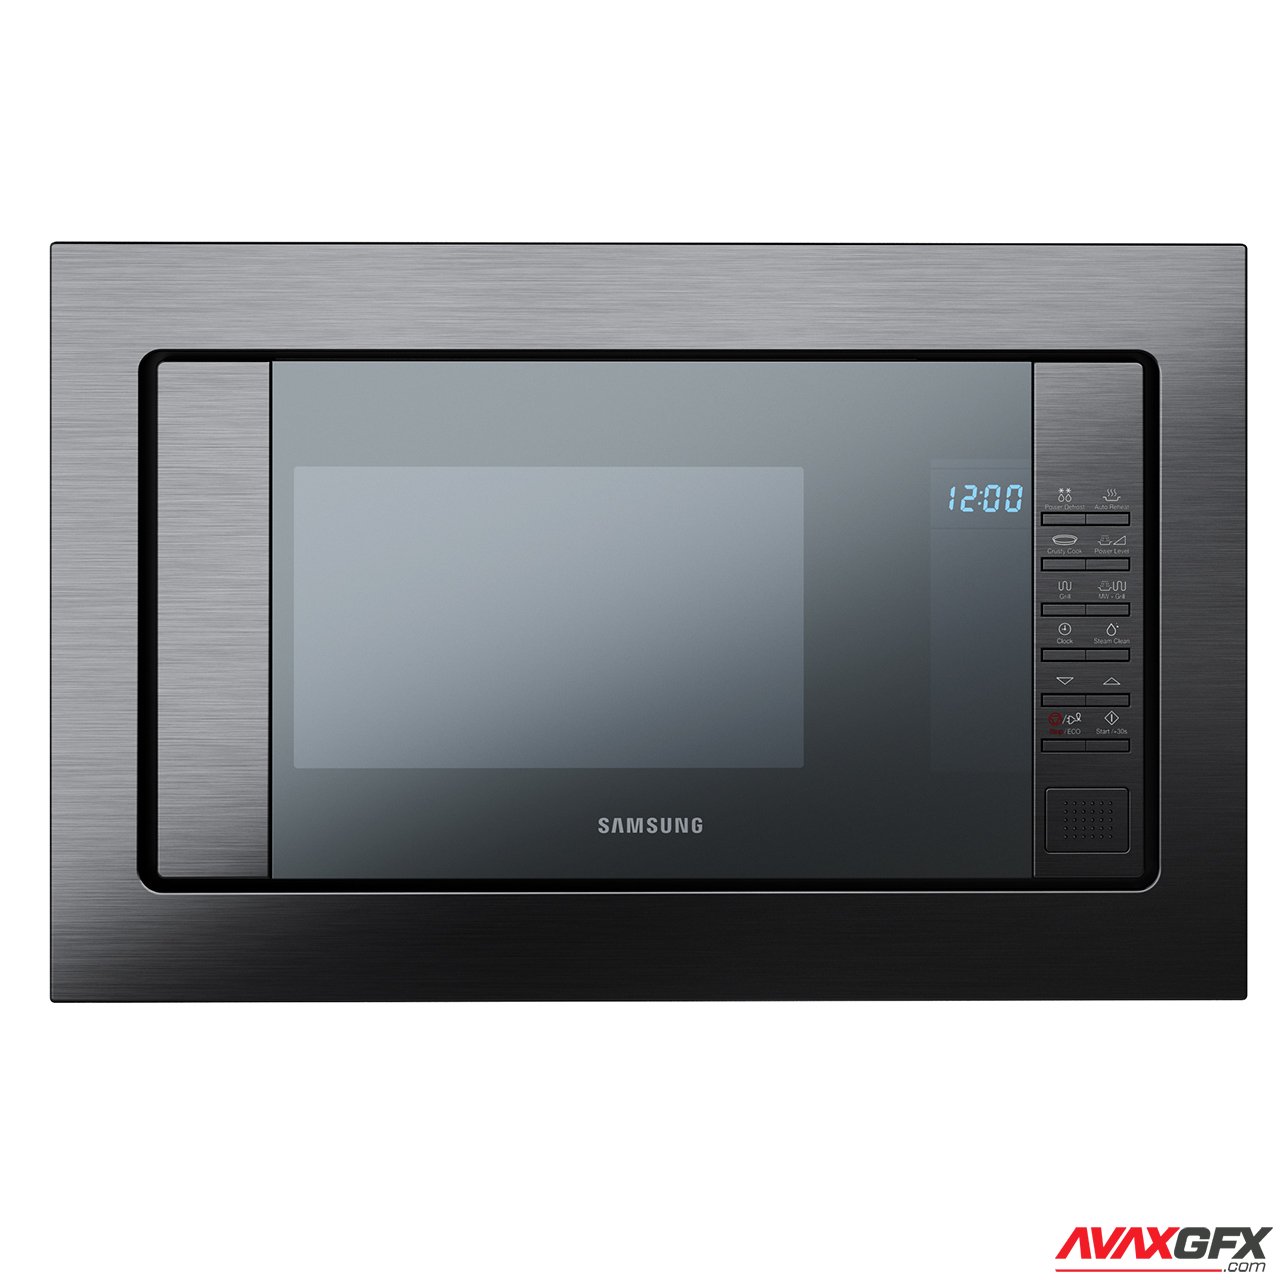 Built-in Microwave Oven Grill FG87 by Samsung 3D Model